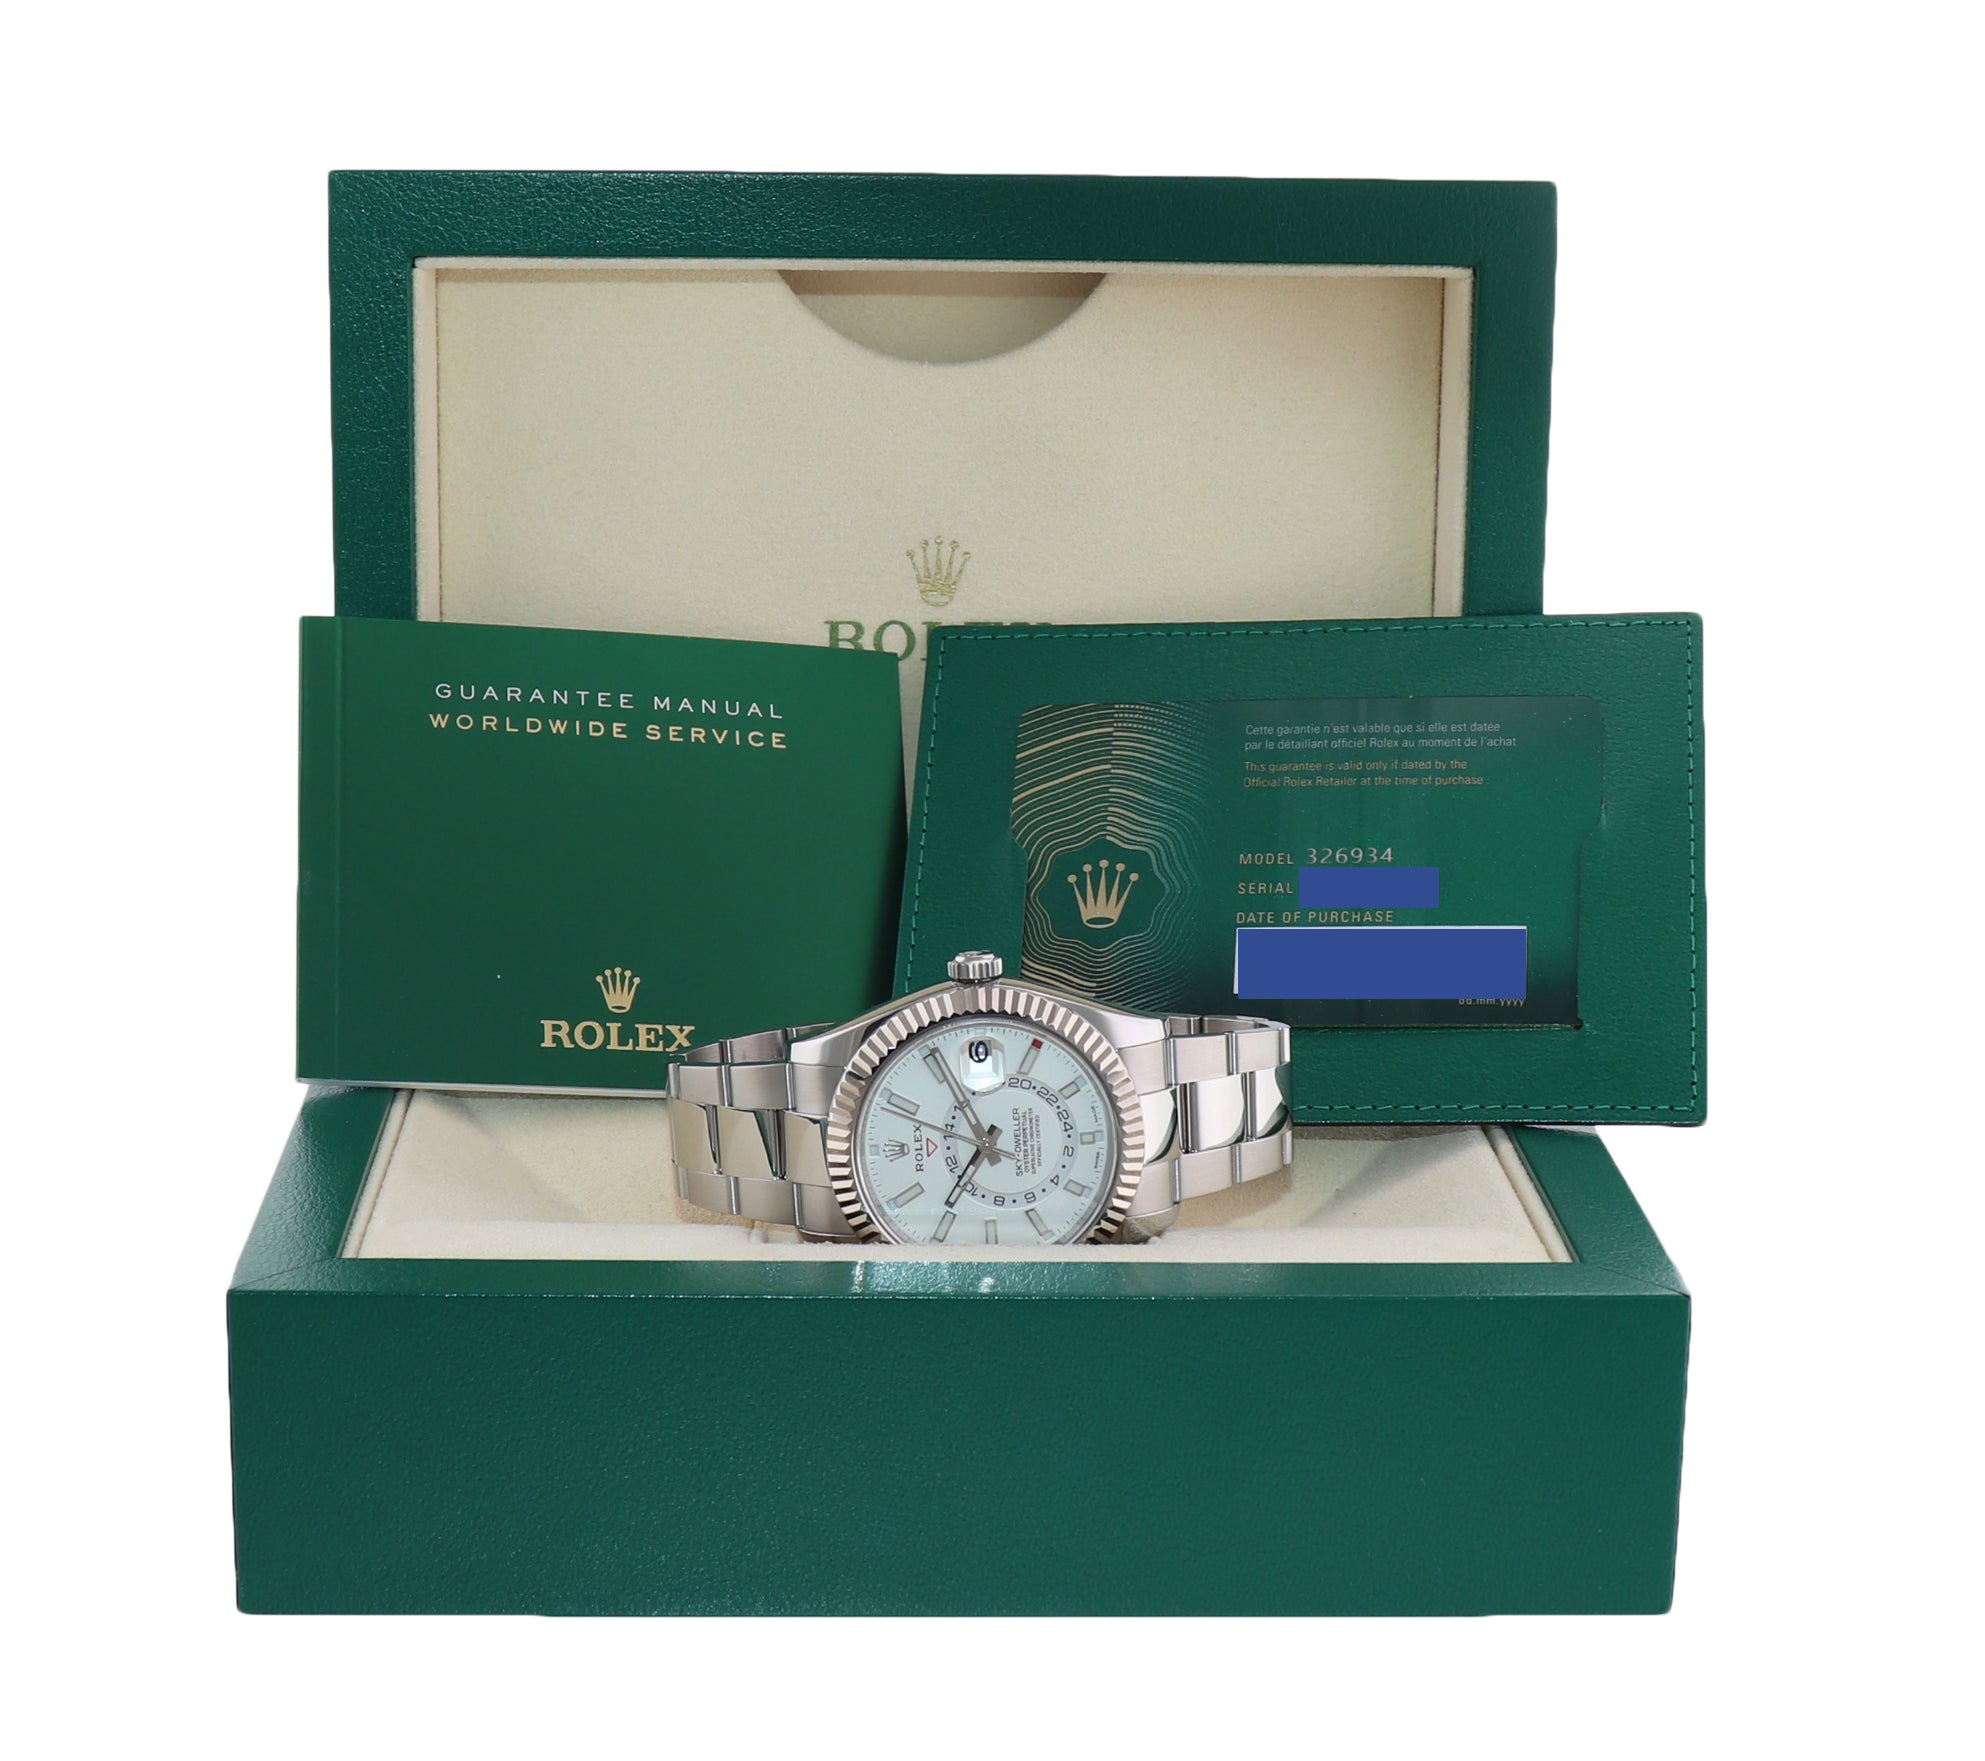 2020 PAPERS Rolex Sky-Dweller Stainless White Gold White 42mm 326934 Watch Box